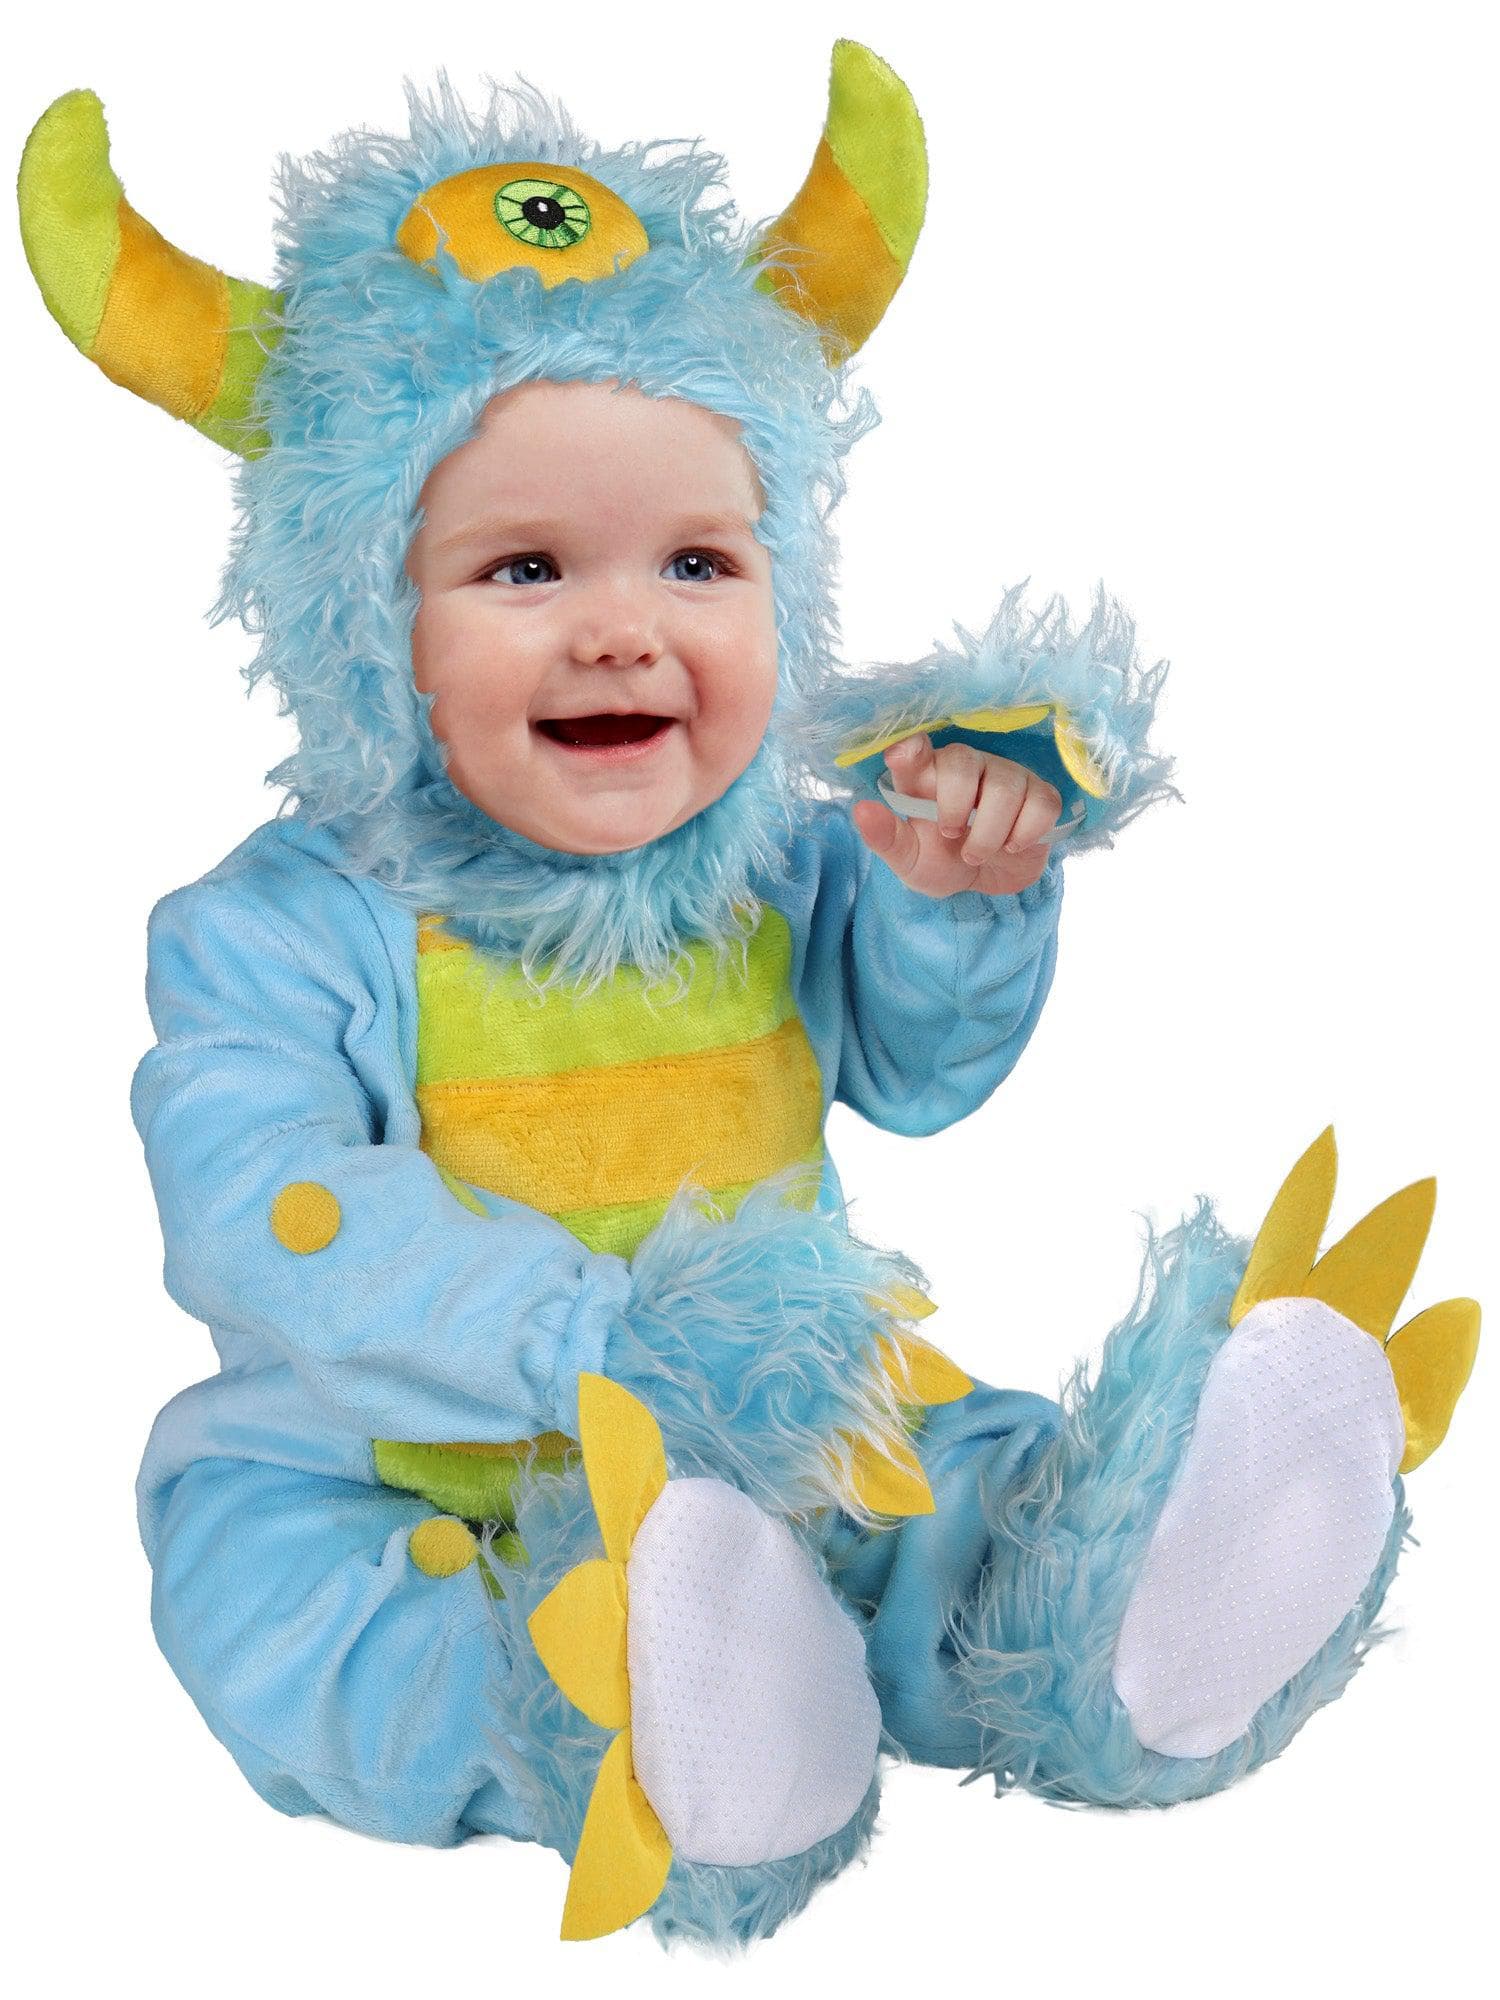 Blue Monster Baby/Toddler Costume - costumes.com